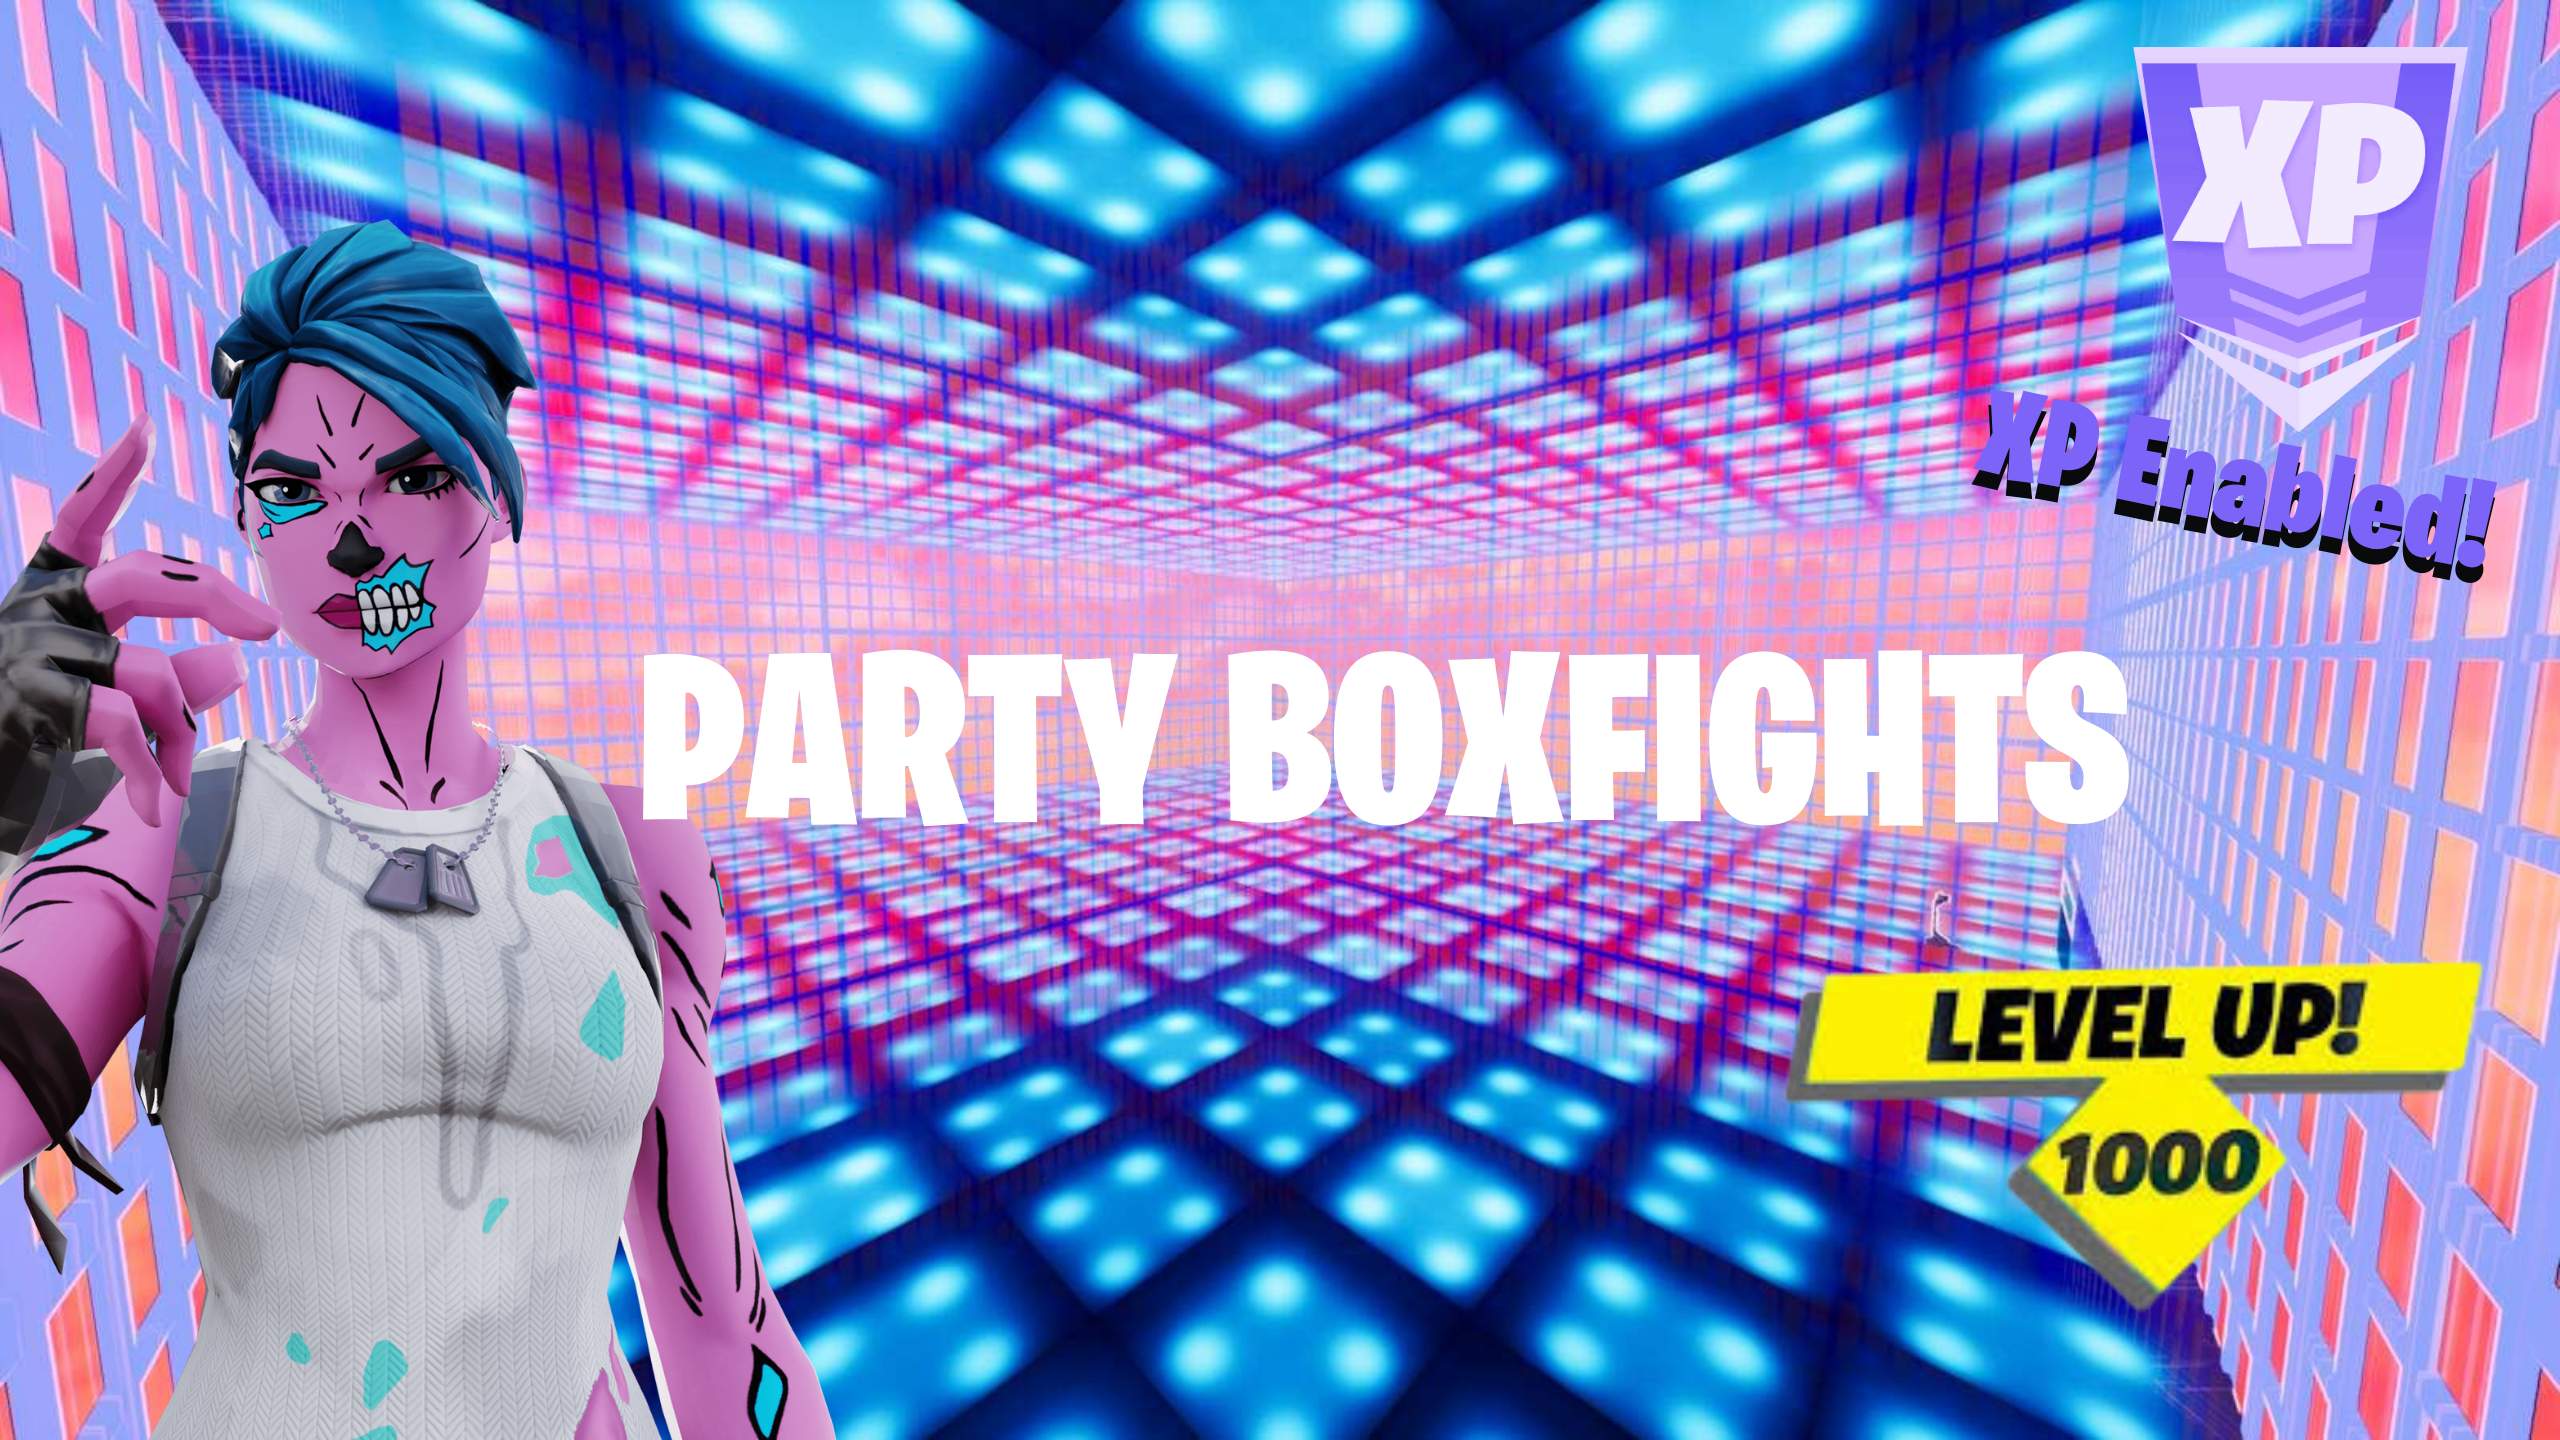 🎉PARTY BOX FIGHTS 🎉